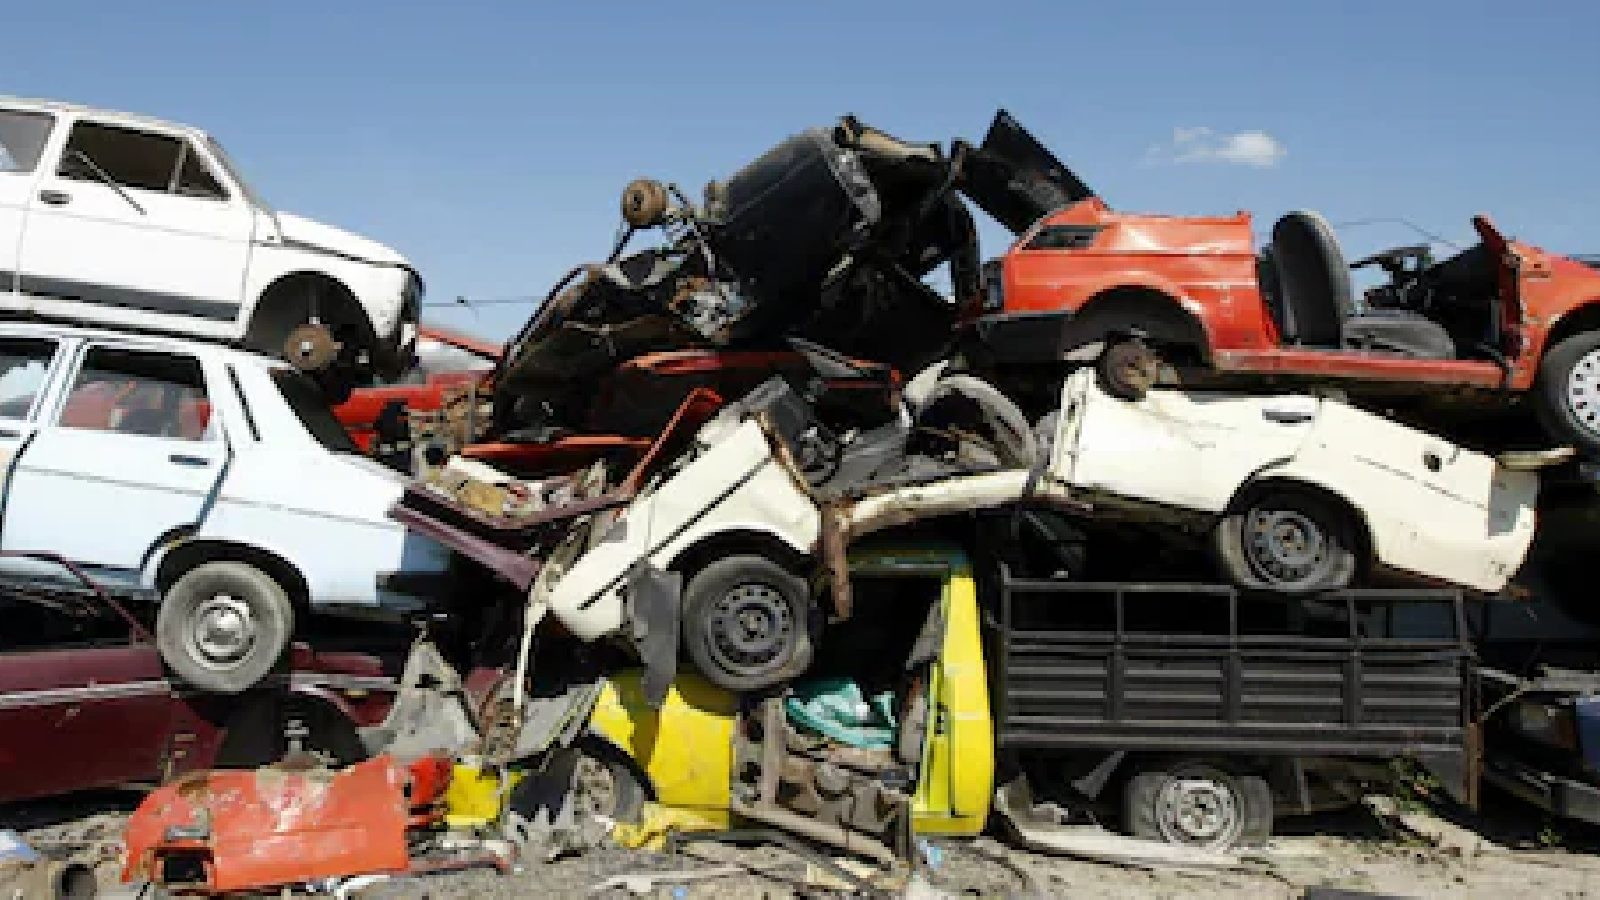 Vehicle owners will get exemption from motor vehicle tax for 15 years if old and unfit vehicle is scrapped in the junk